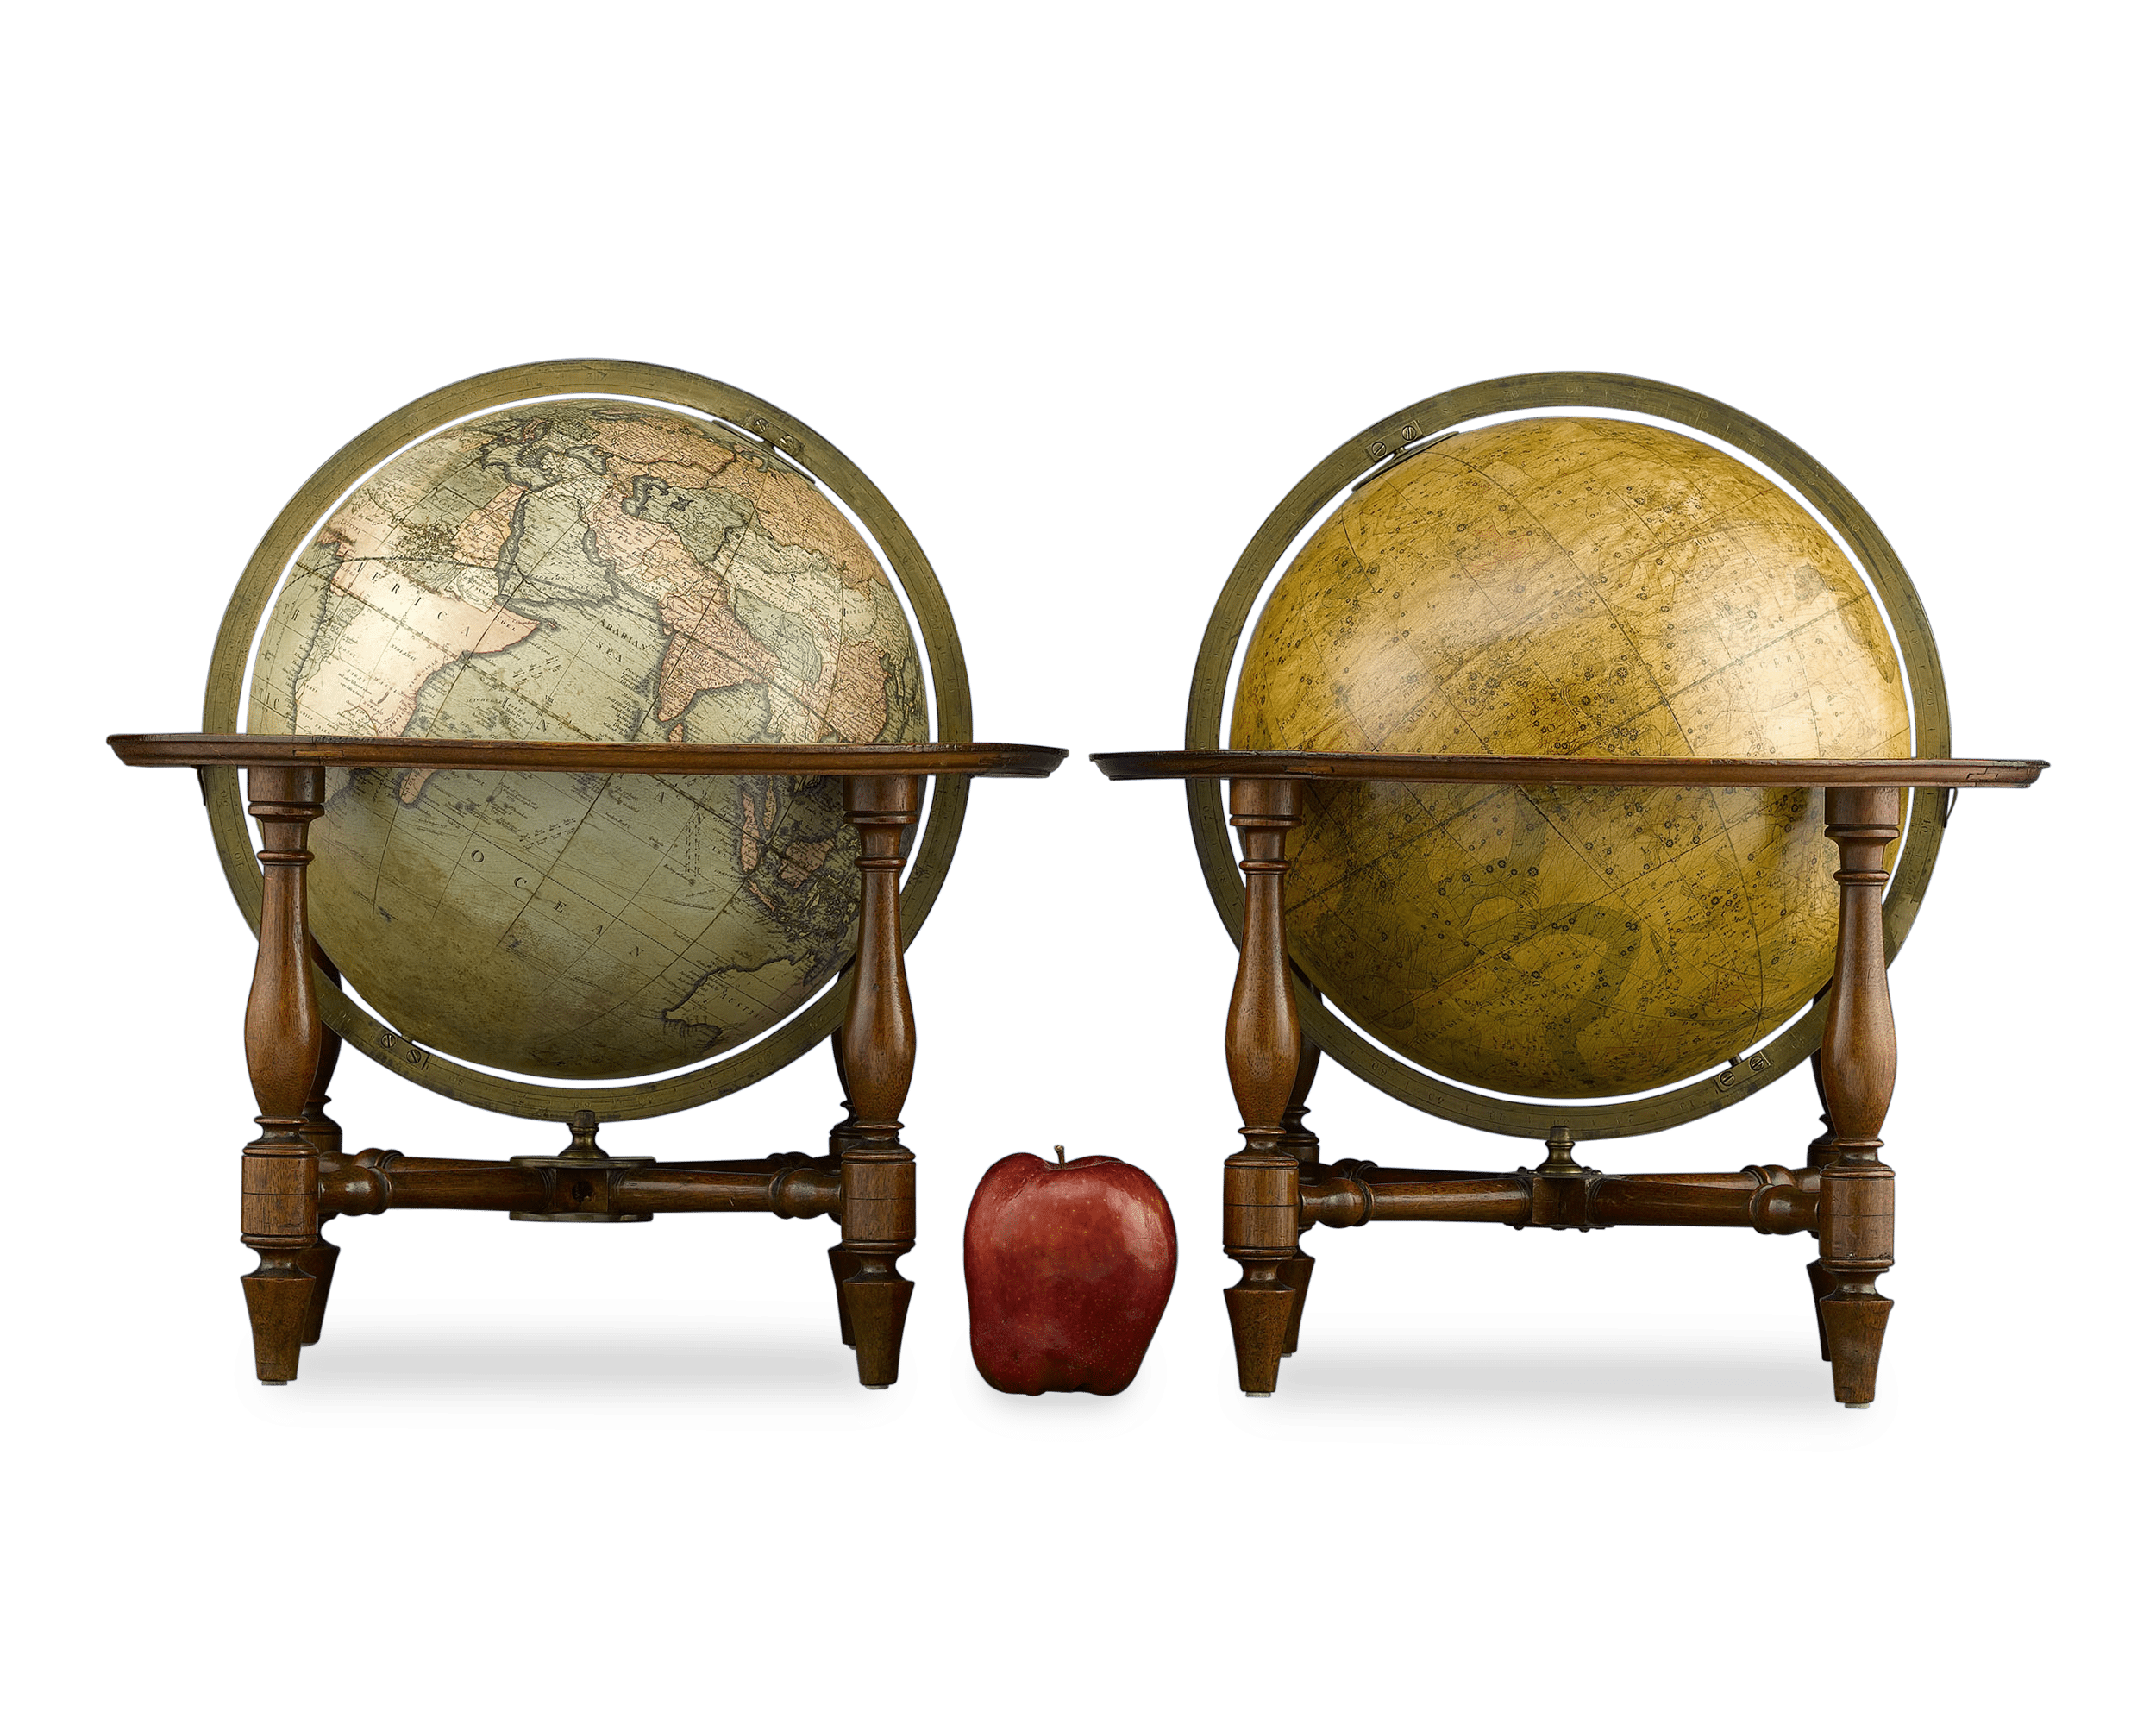 Each globe is held within an elegant mahogany stand